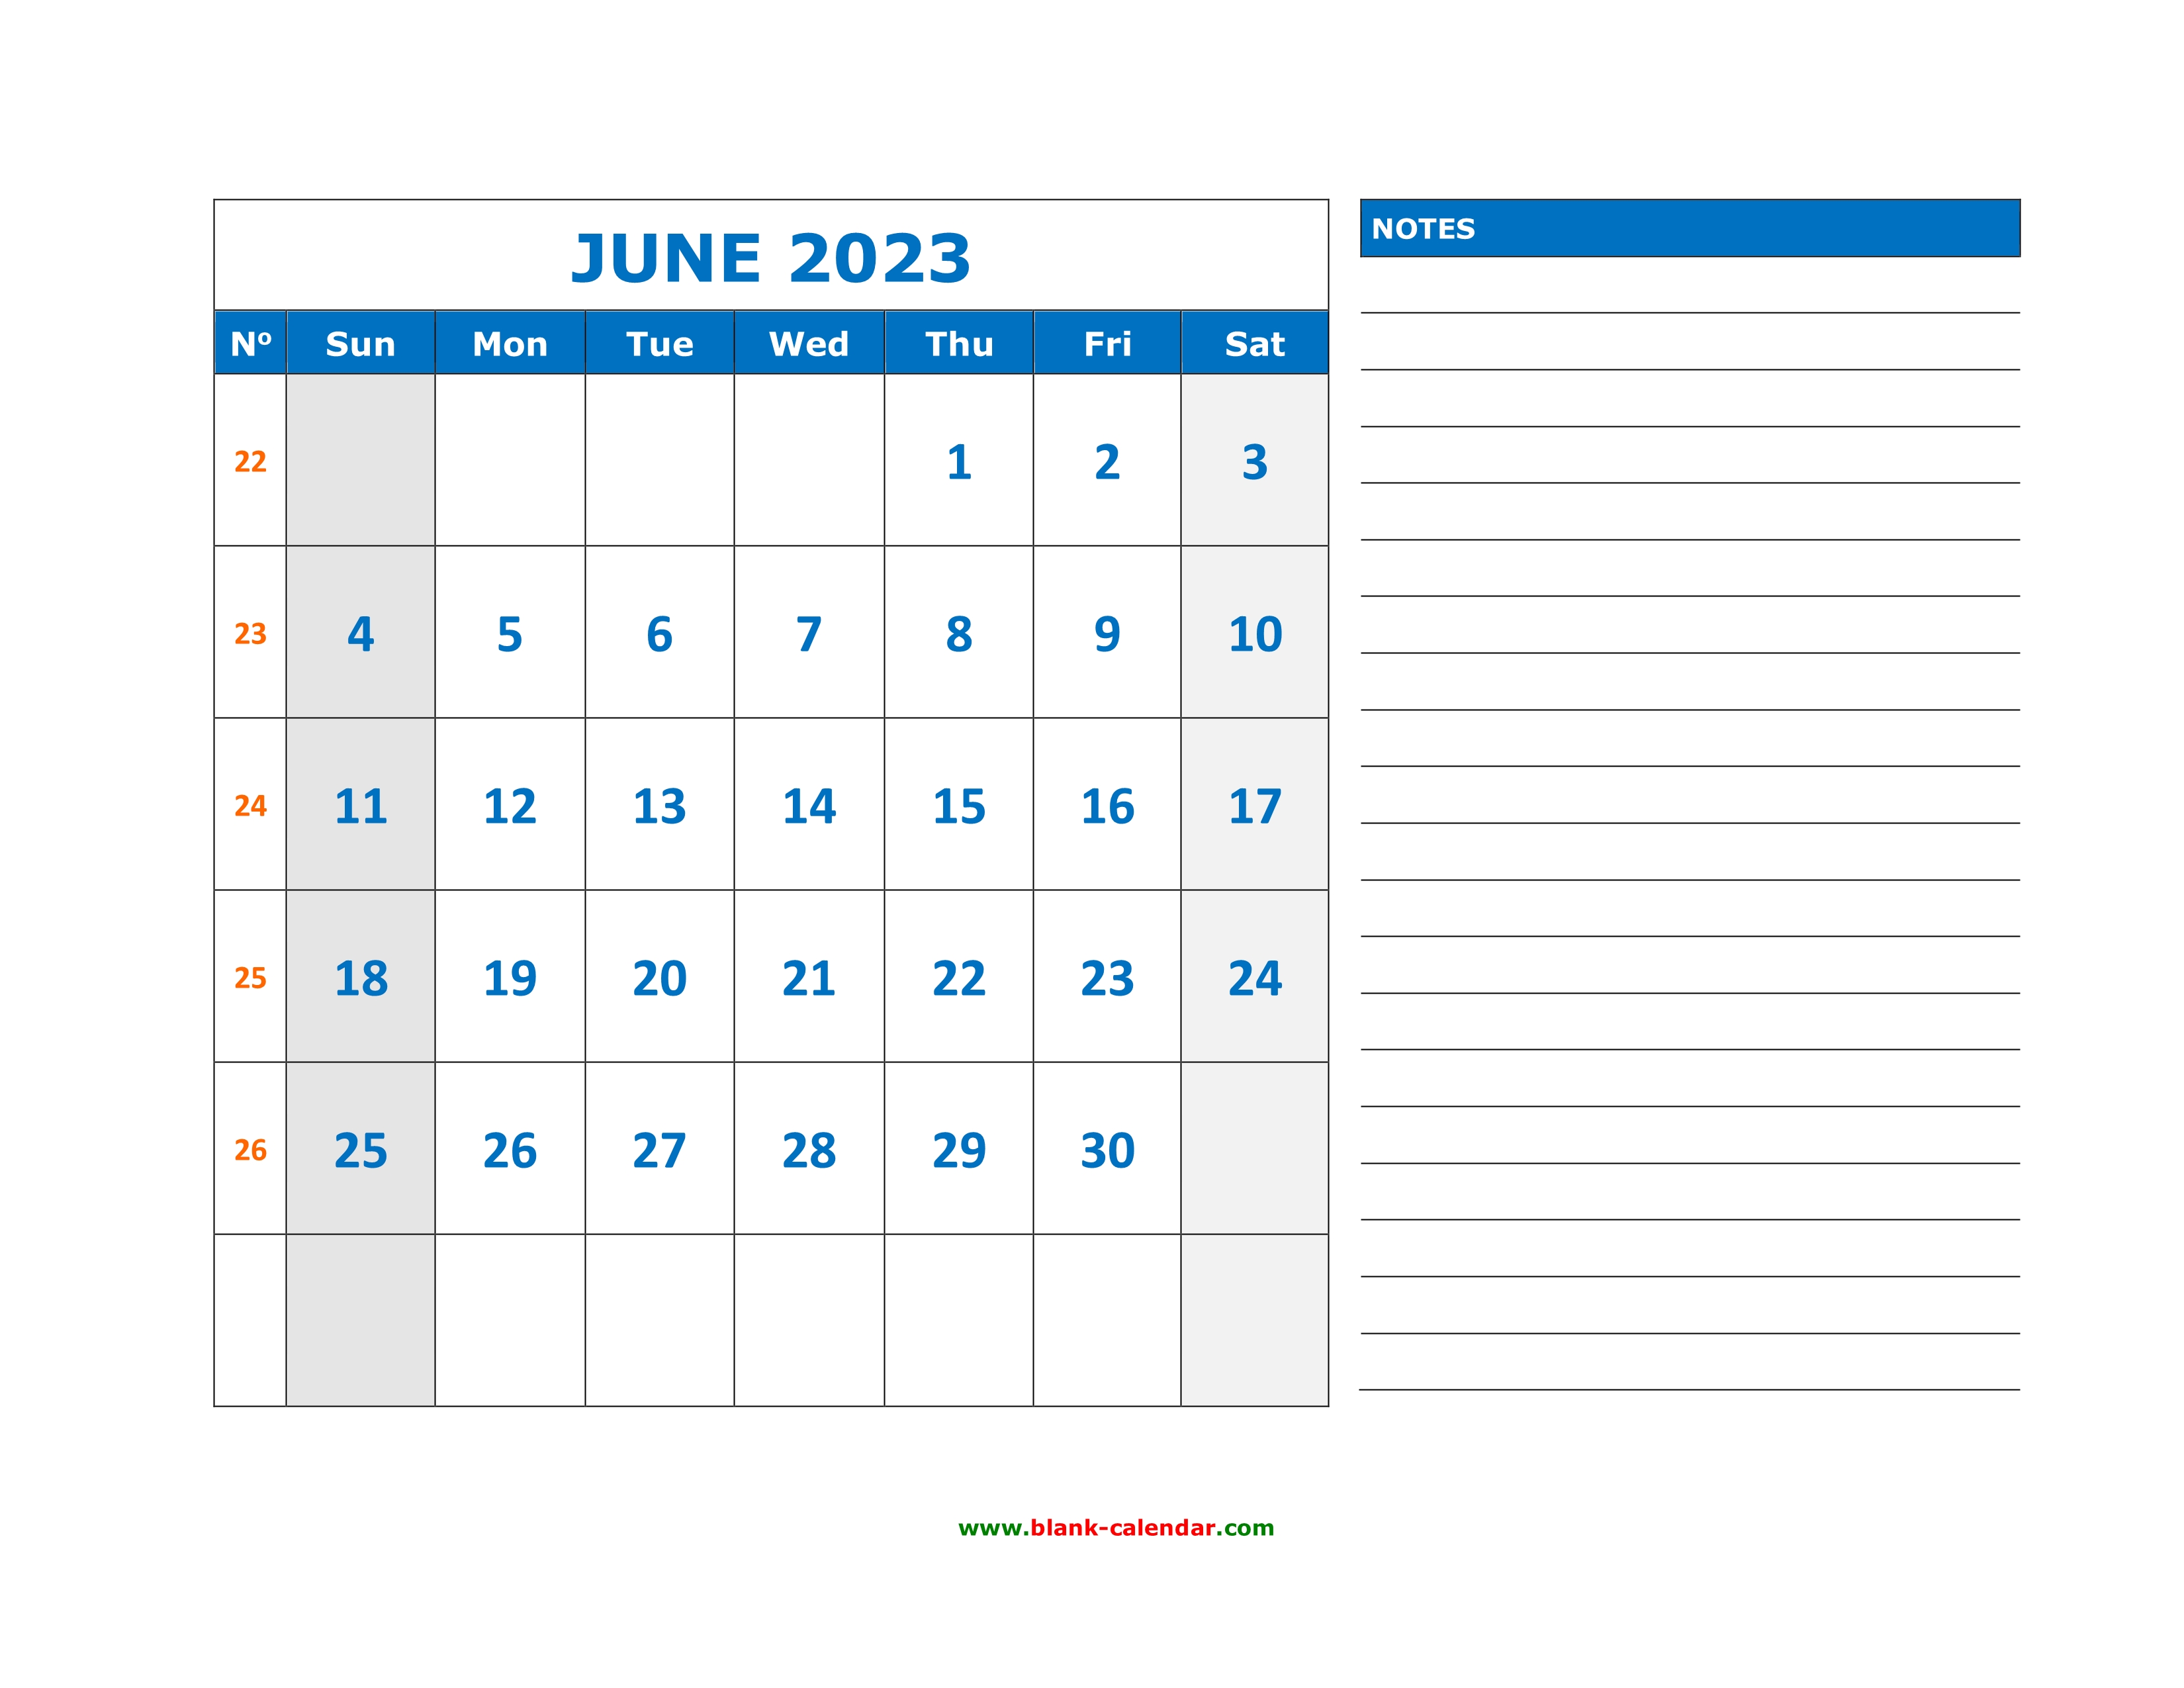 Free Download Printable June 2023 Calendar, large space for appointment